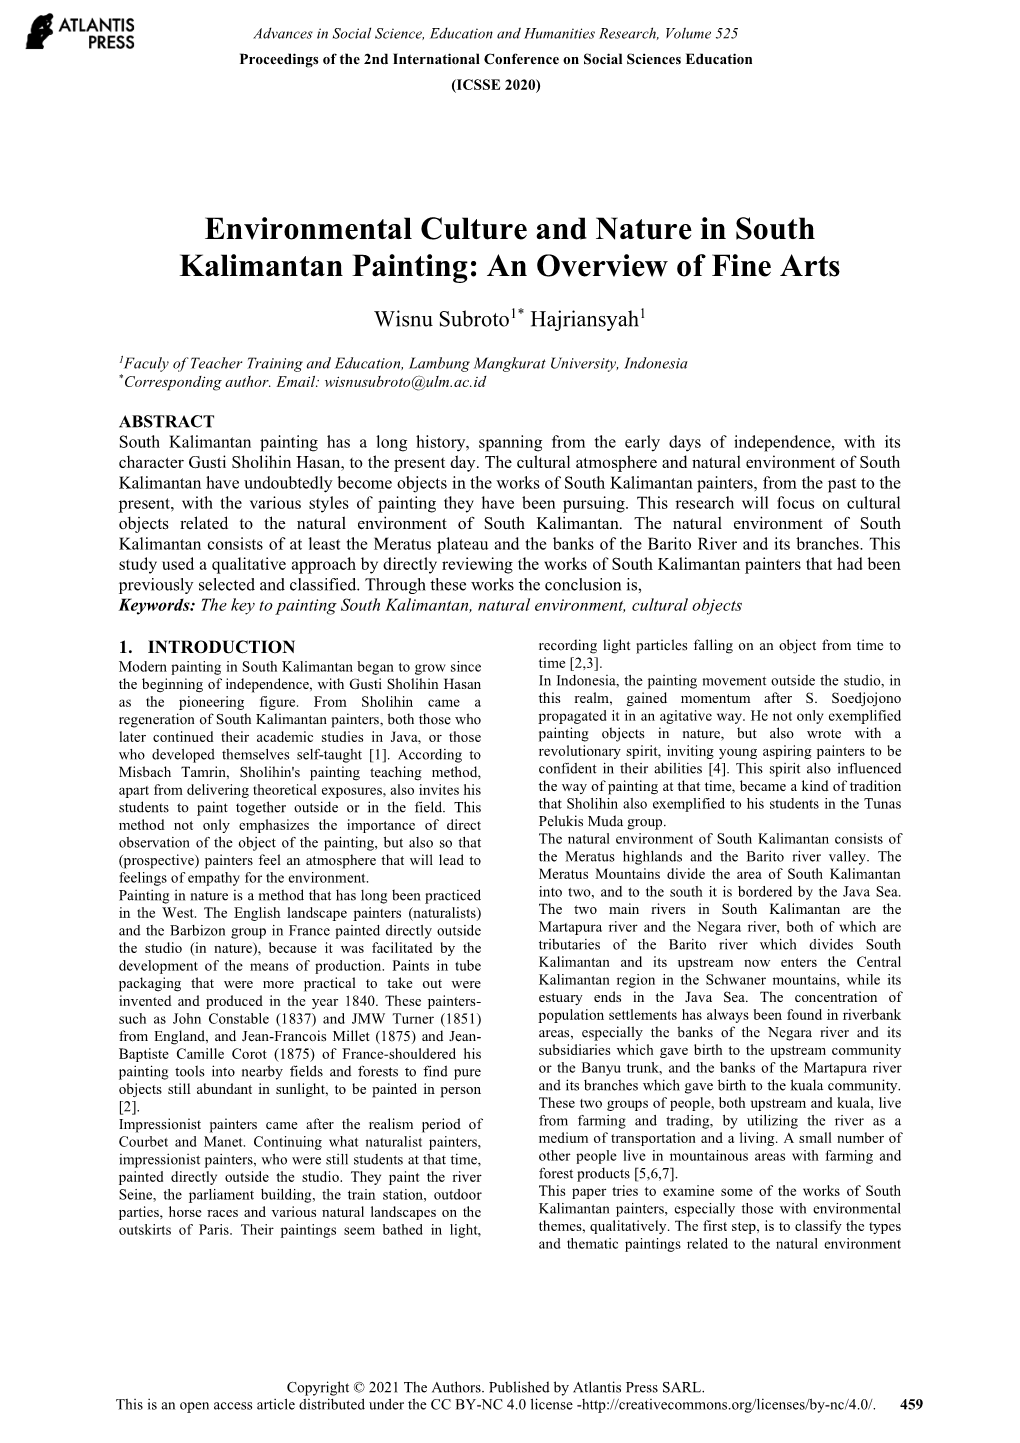 Environmental Culture and Nature in South Kalimantan Painting: an Overview of Fine Arts